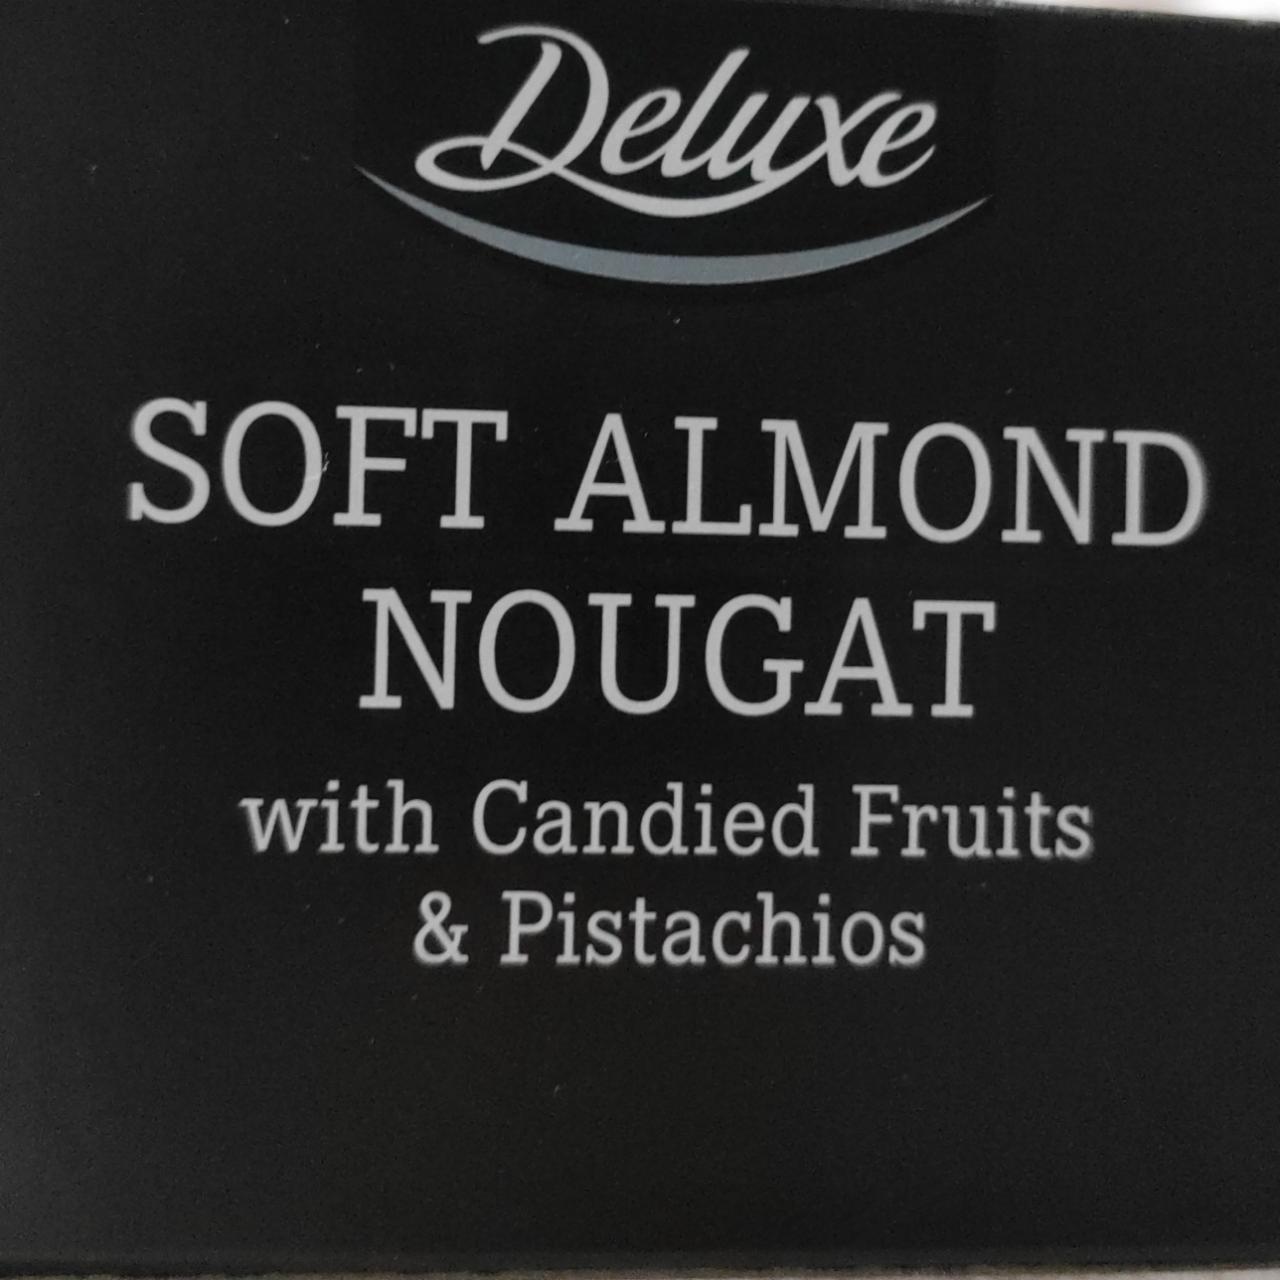 Fotografie - Soft Almond Nougat With Candied Fruits & Pistachios Deluxe